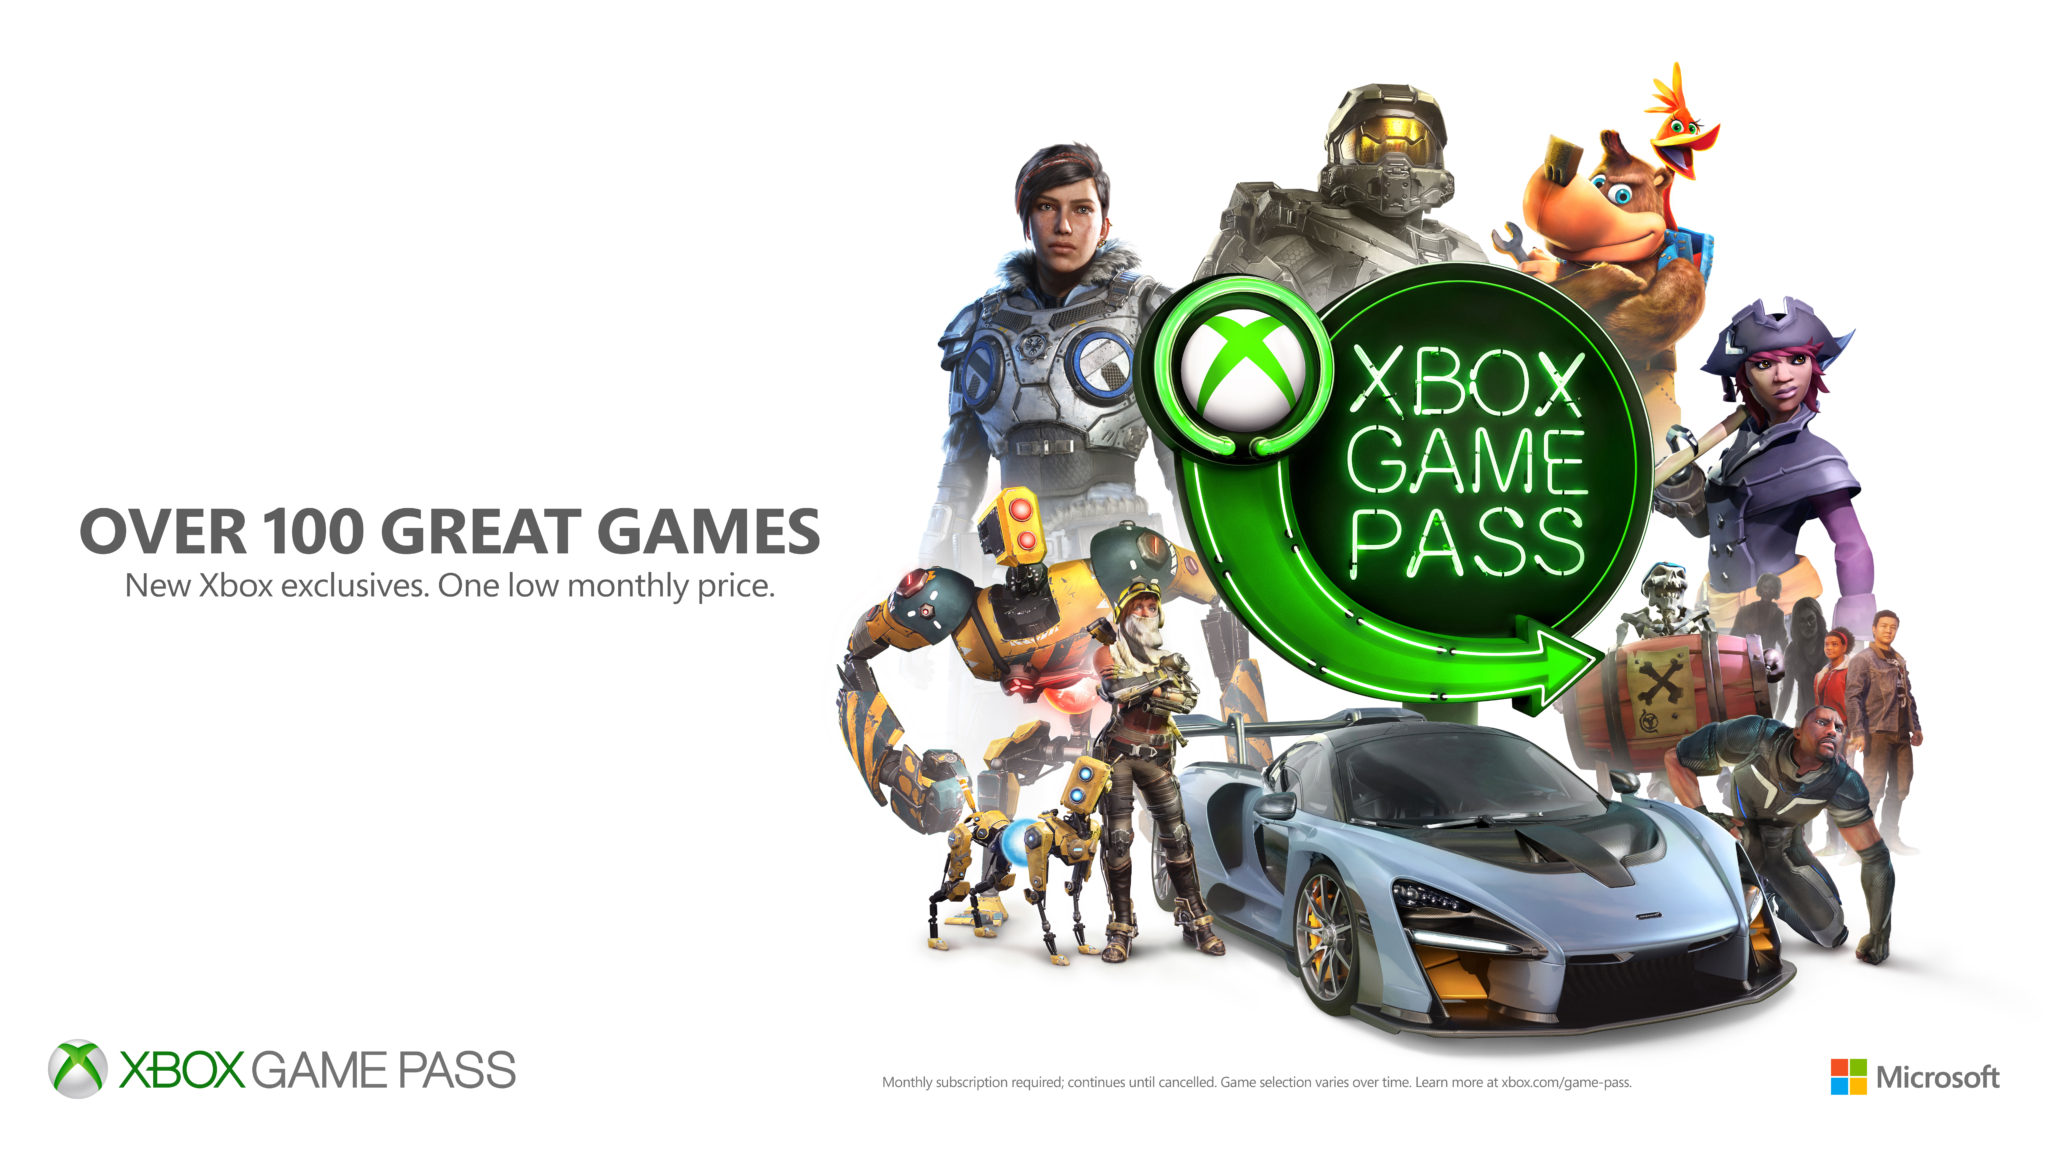 Every Xbox Bundle, Controller and Subscription Available this Holiday